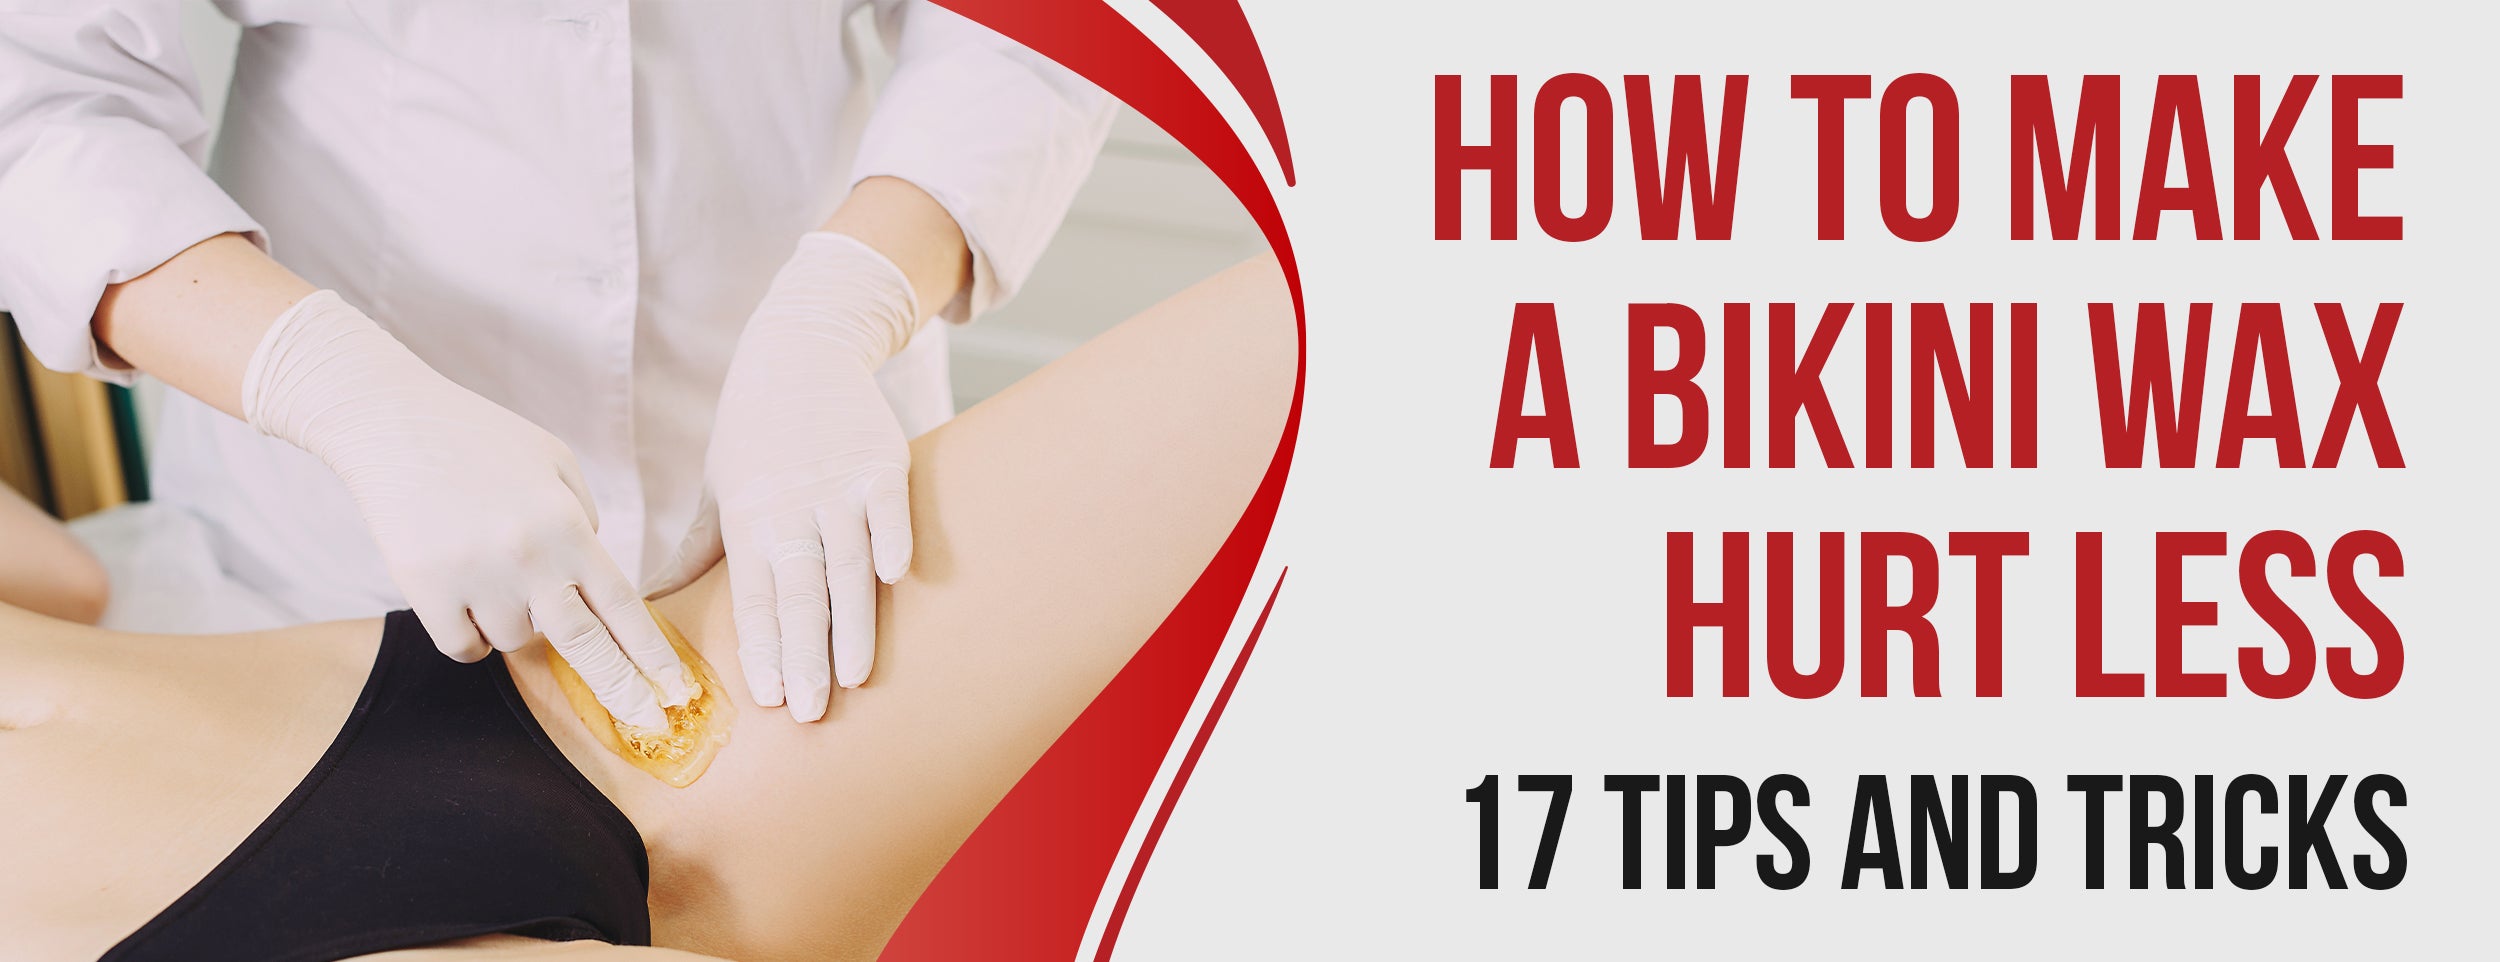 Tips and tricks for making a bikini wax less painful